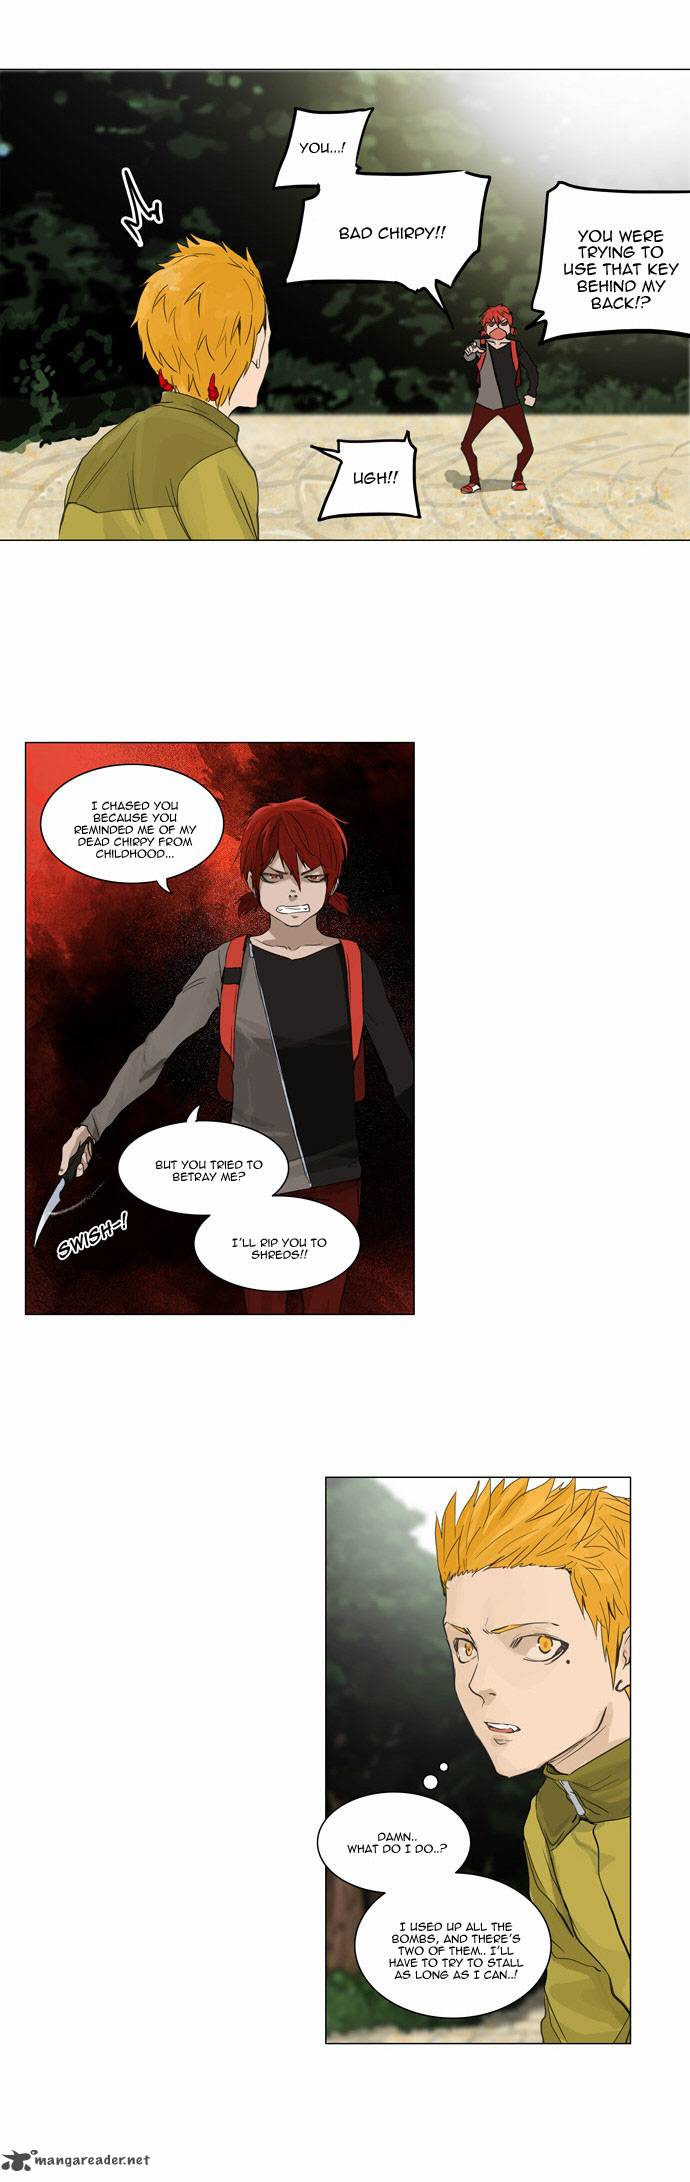 Tower Of God 120 17